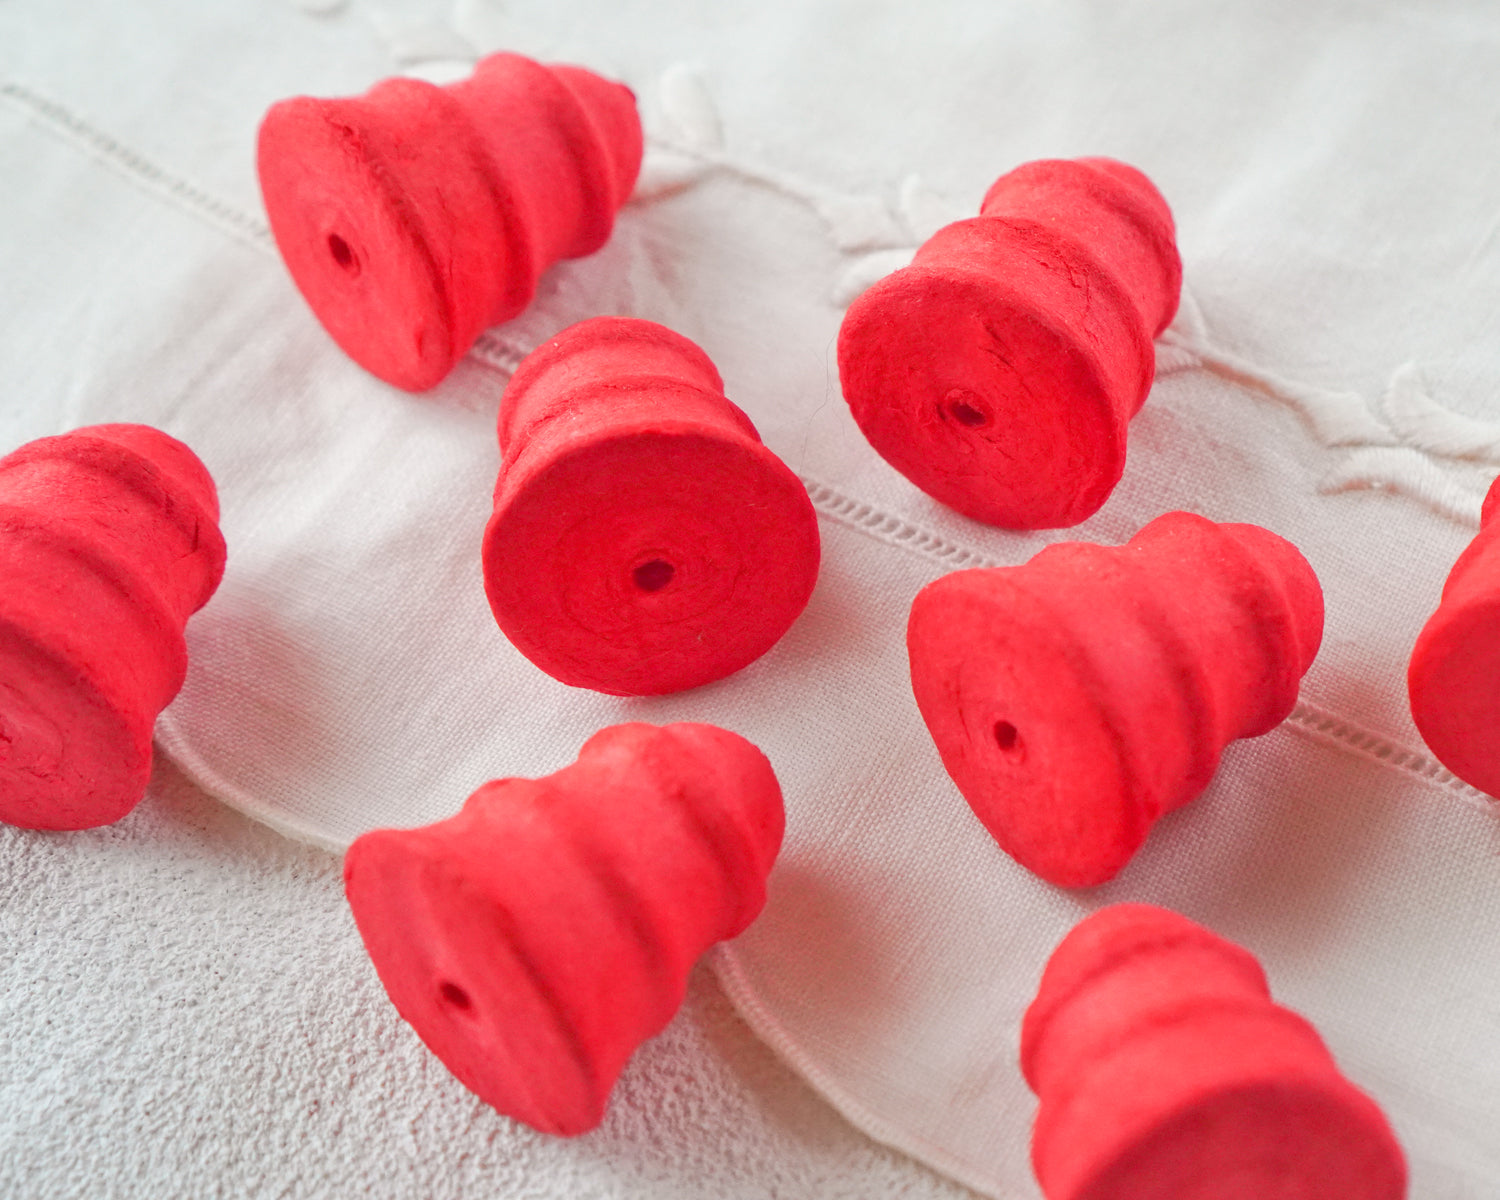 Red Spun Cotton Bells - 32mm Small Retro Striped Bell Craft Shapes, 12 Pcs.